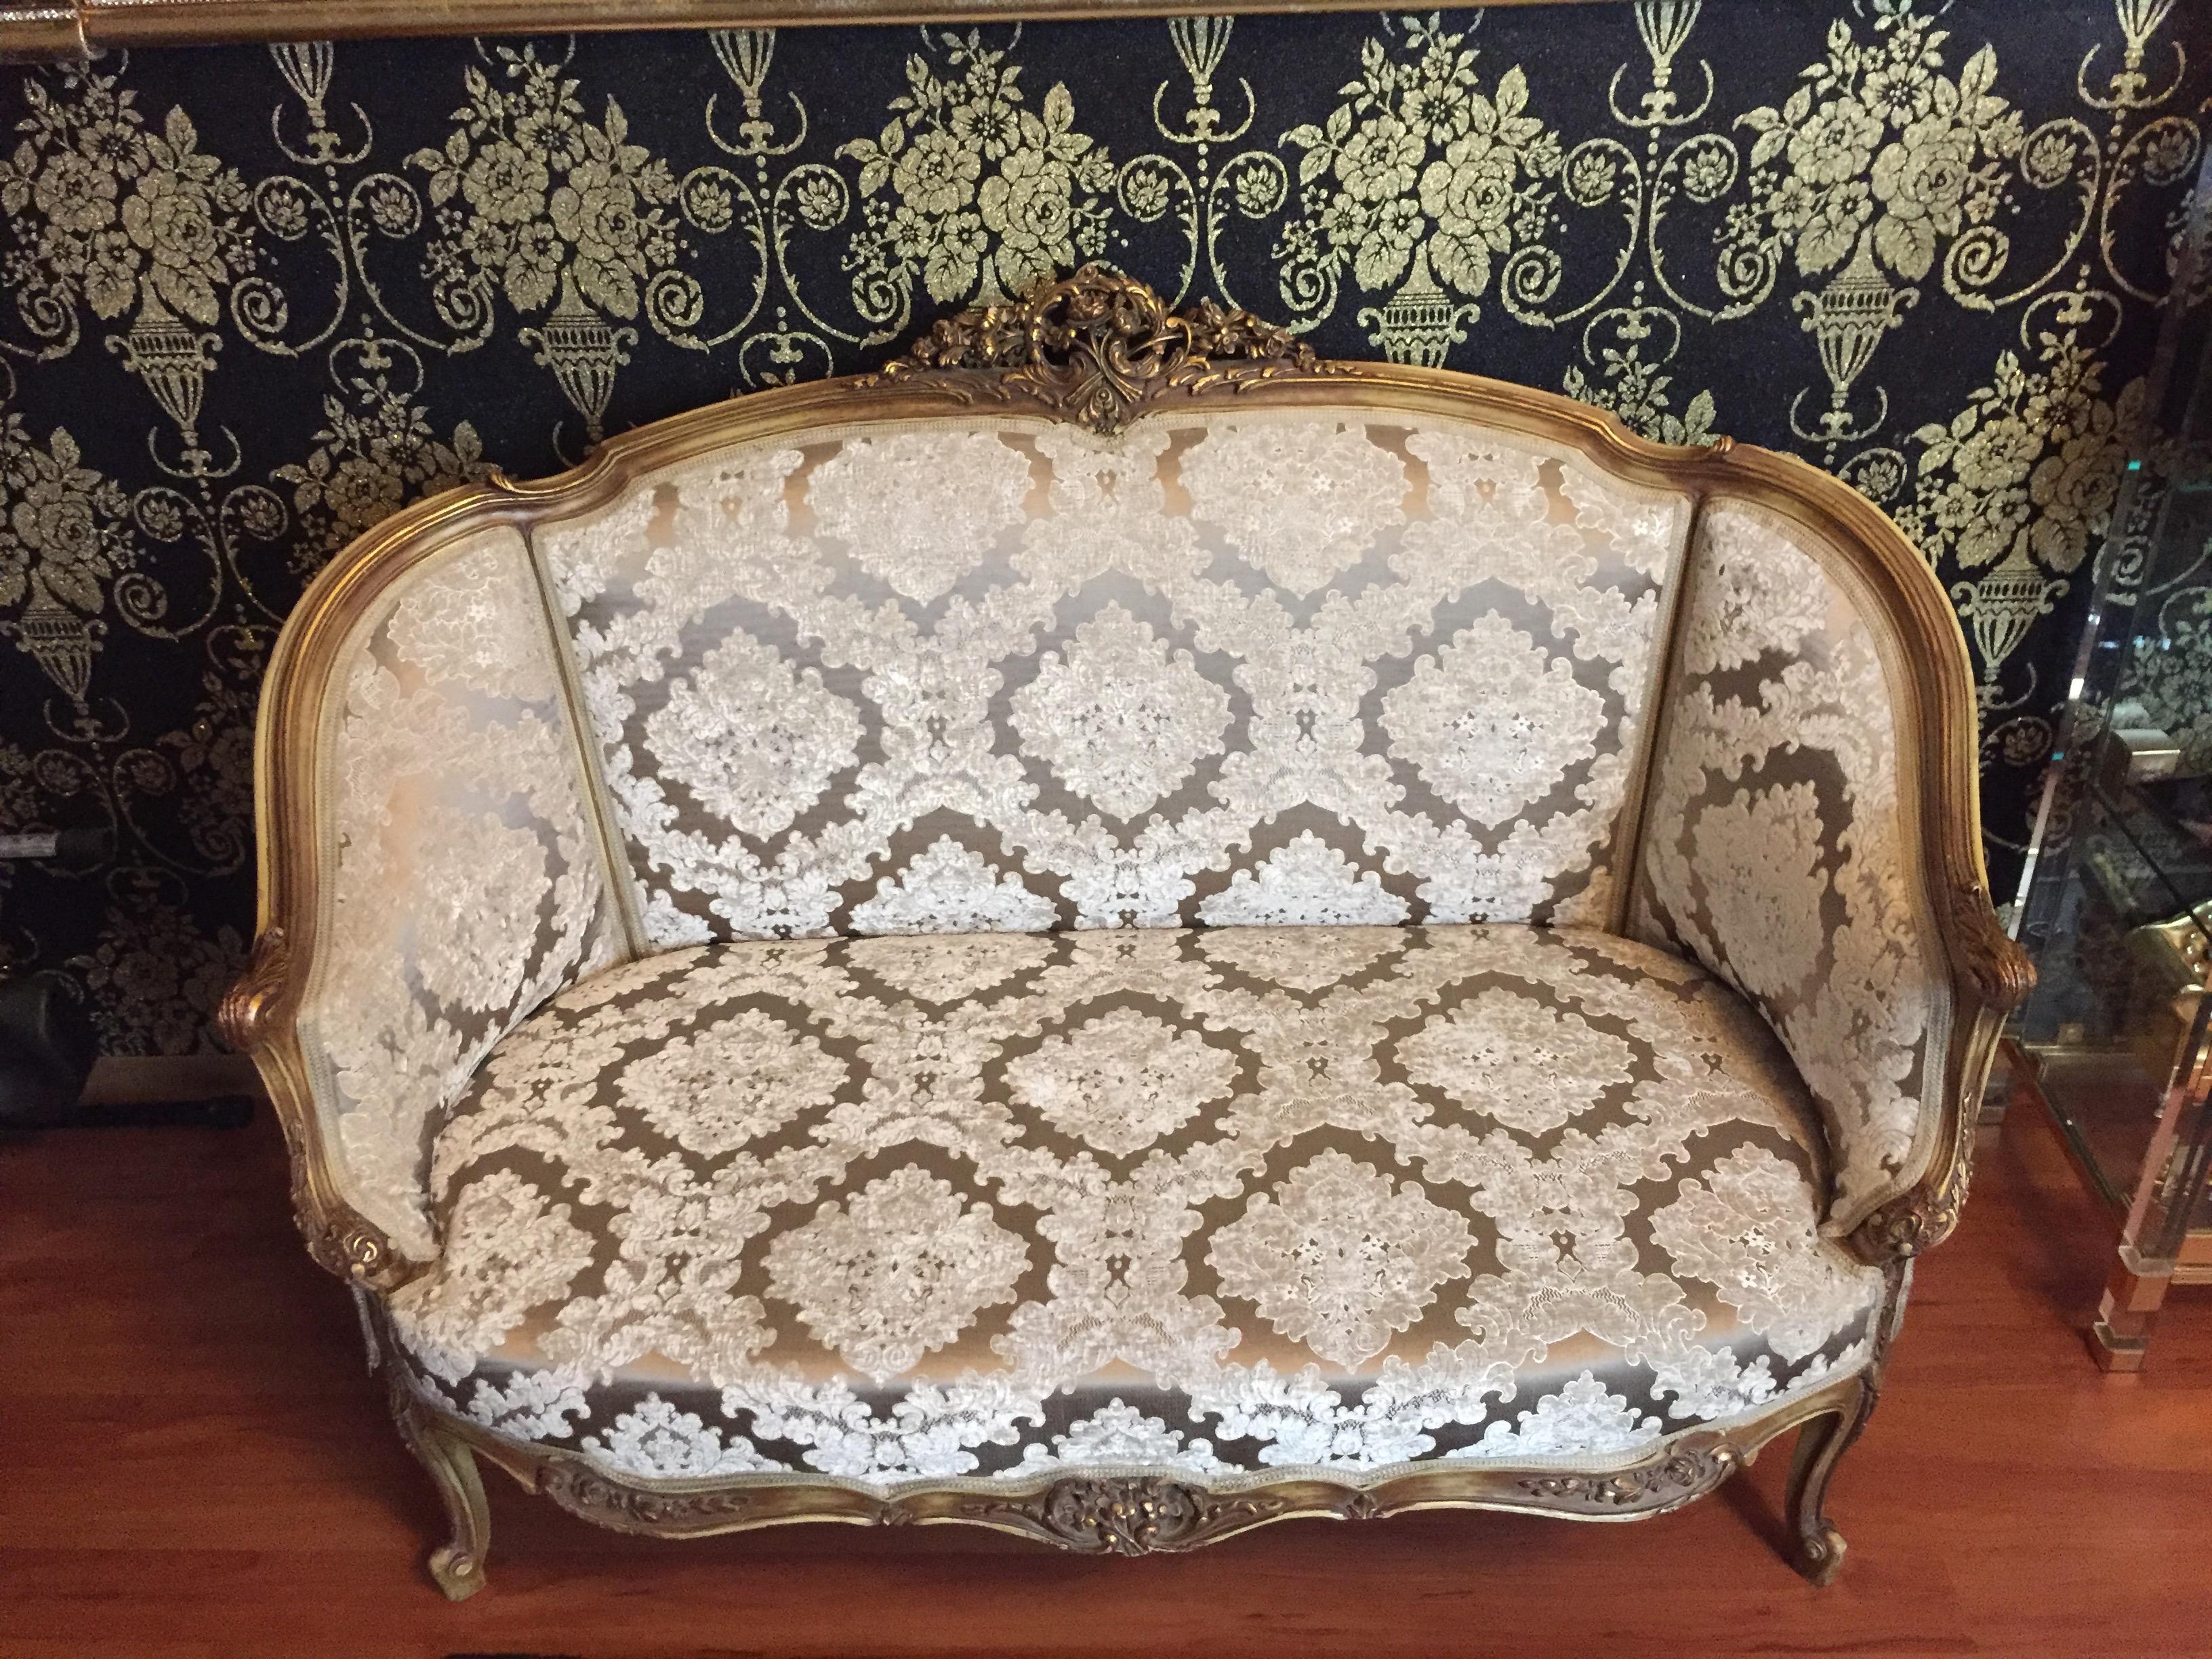 Solid beechwood, carved and gilded. Rising backrest framing with openwork rocaille crowning. Appropriately curved frame with richly carved foliage. Slightly curved frame on curved legs. Seat and backrest are finished with a historical, classic